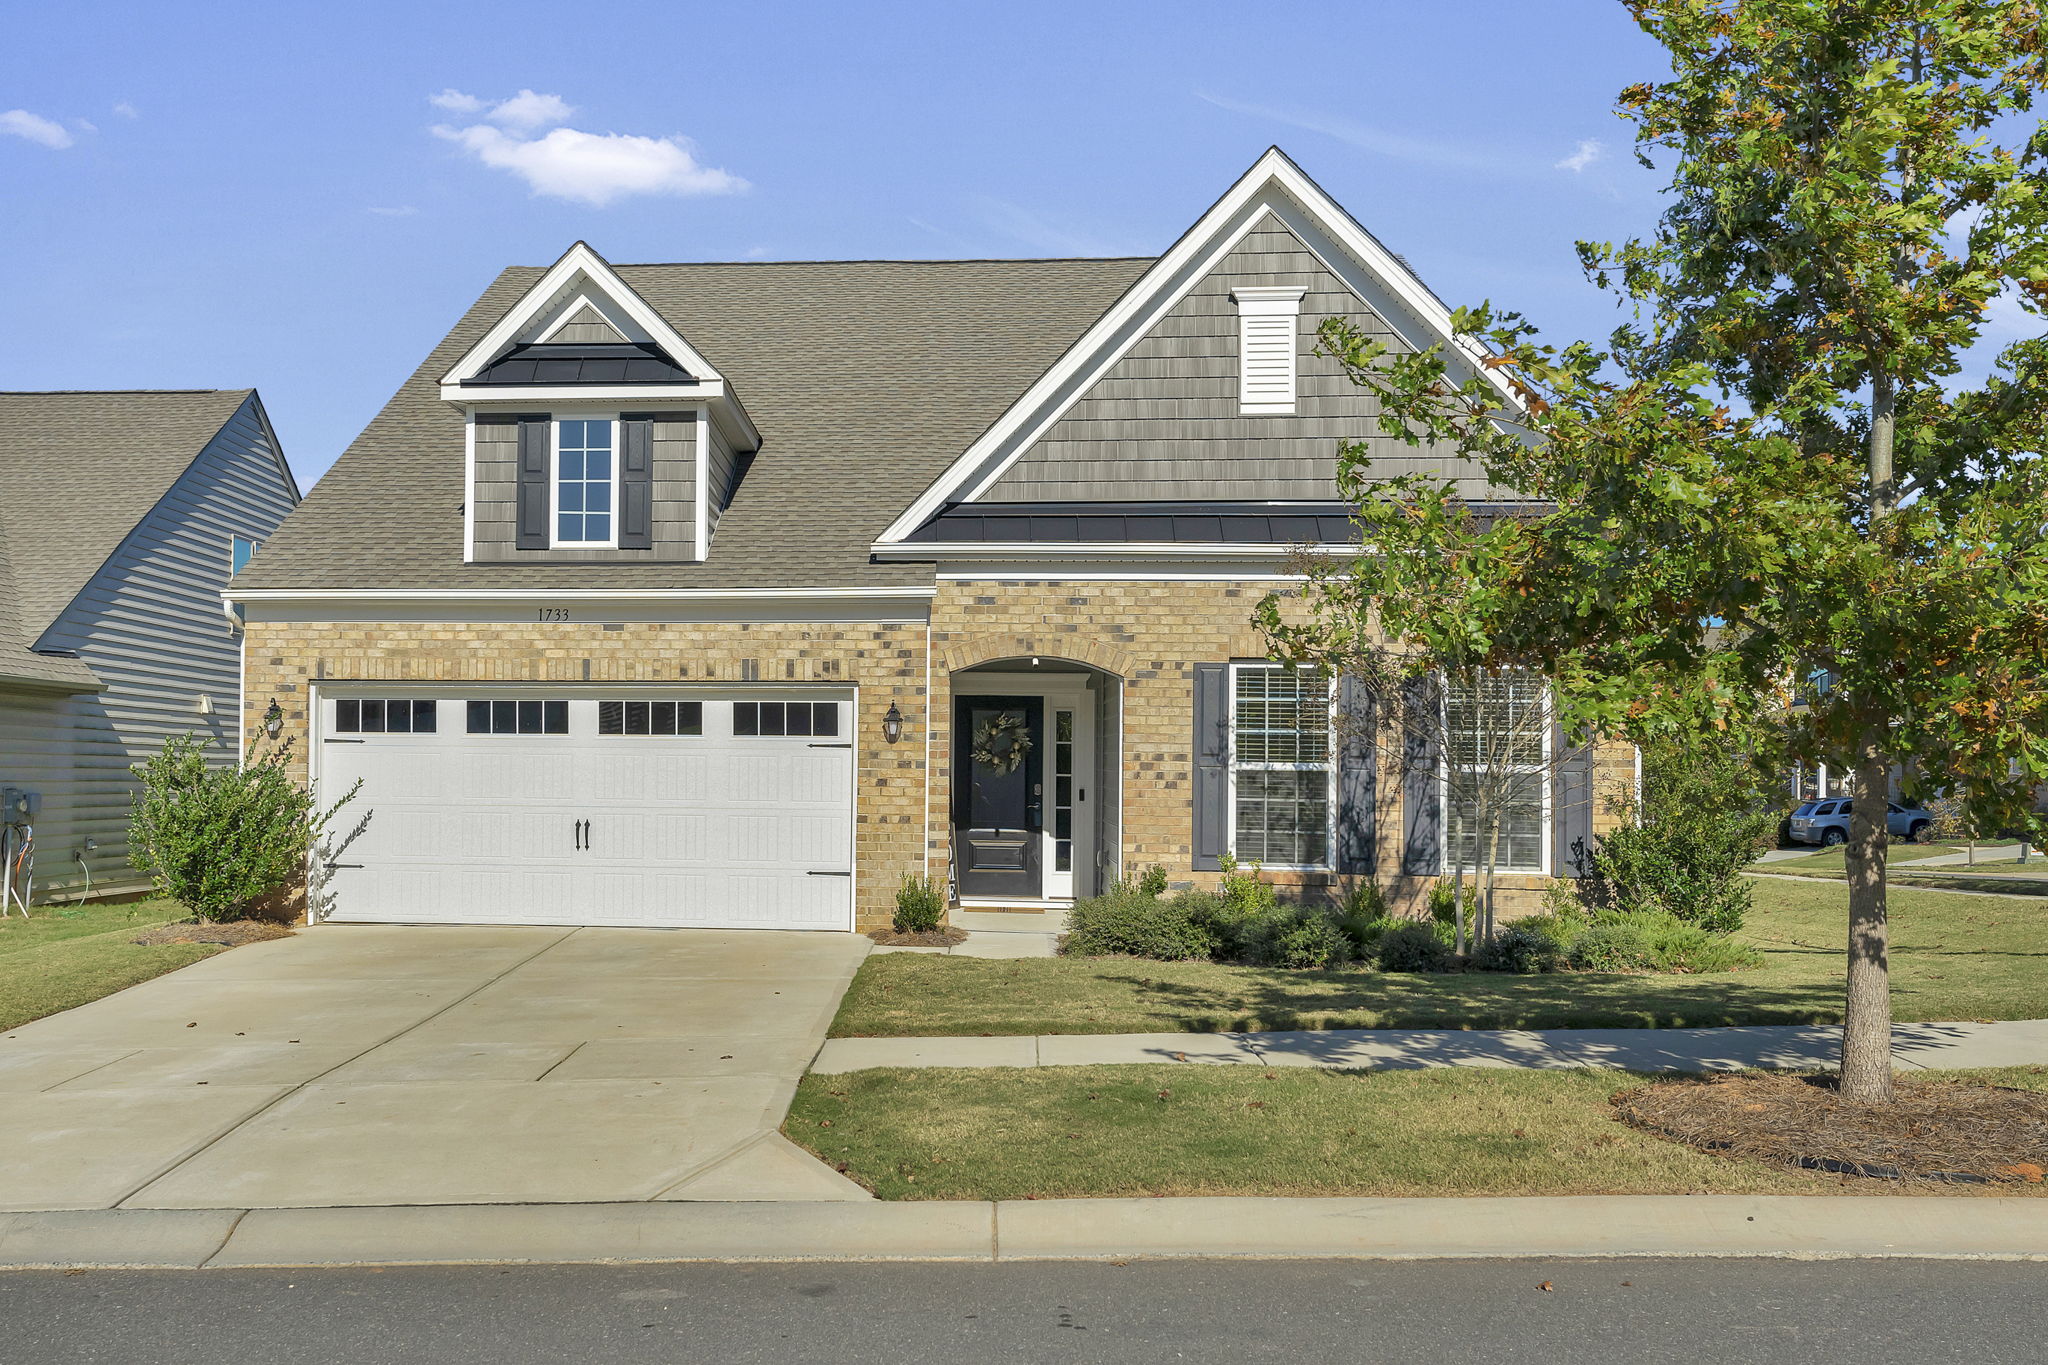  1733 Tailed Hawk Way, Fort Mill, SC 29715, US